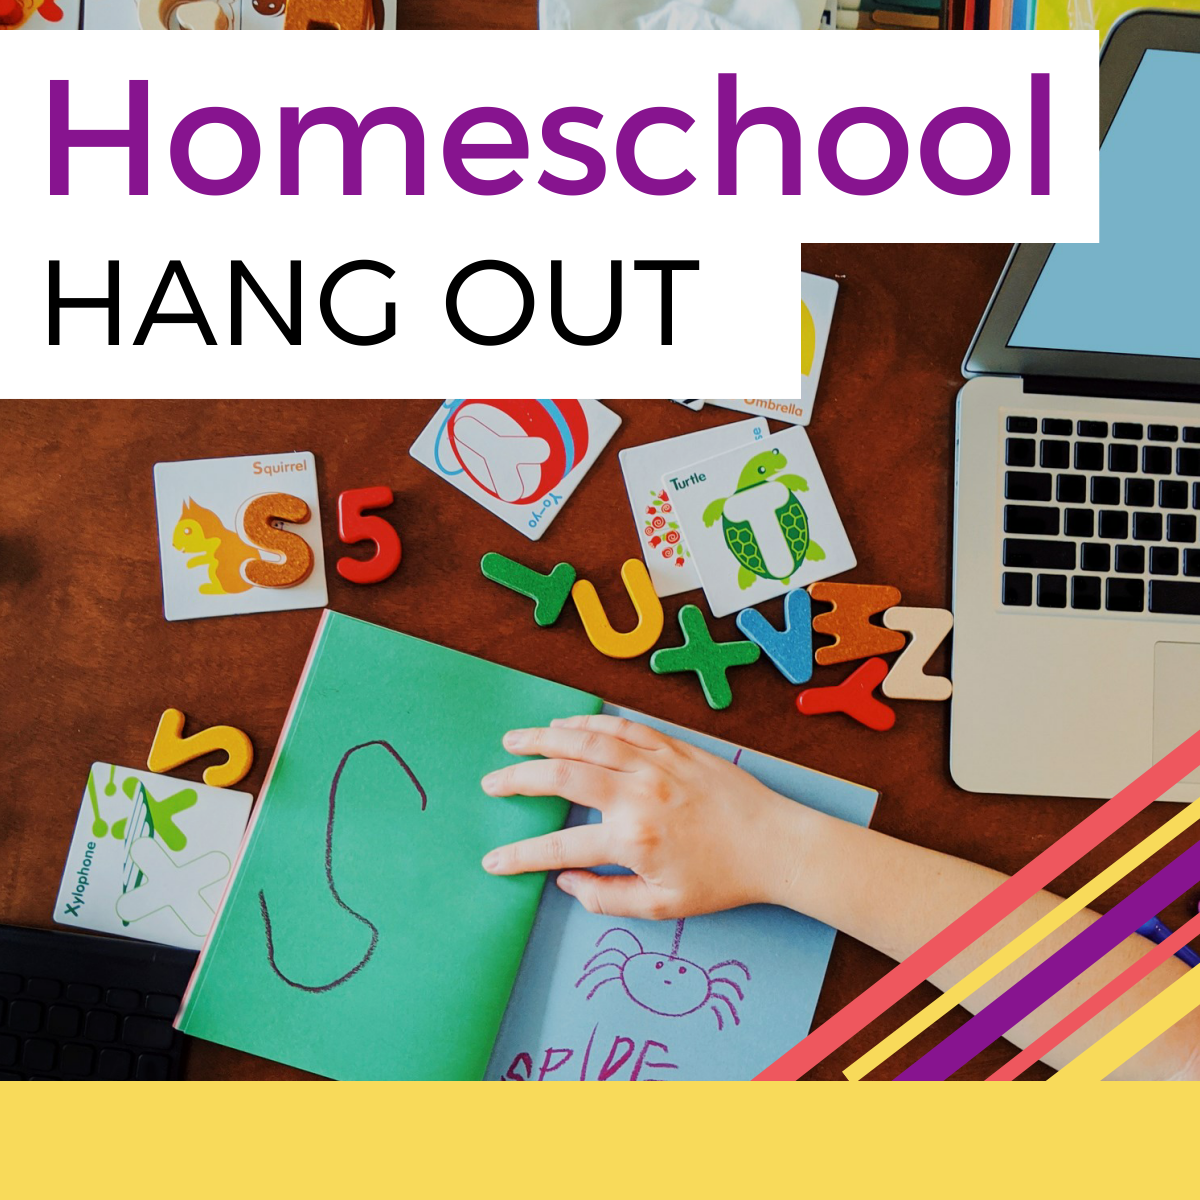 Text reads: Homeschool Hang Out